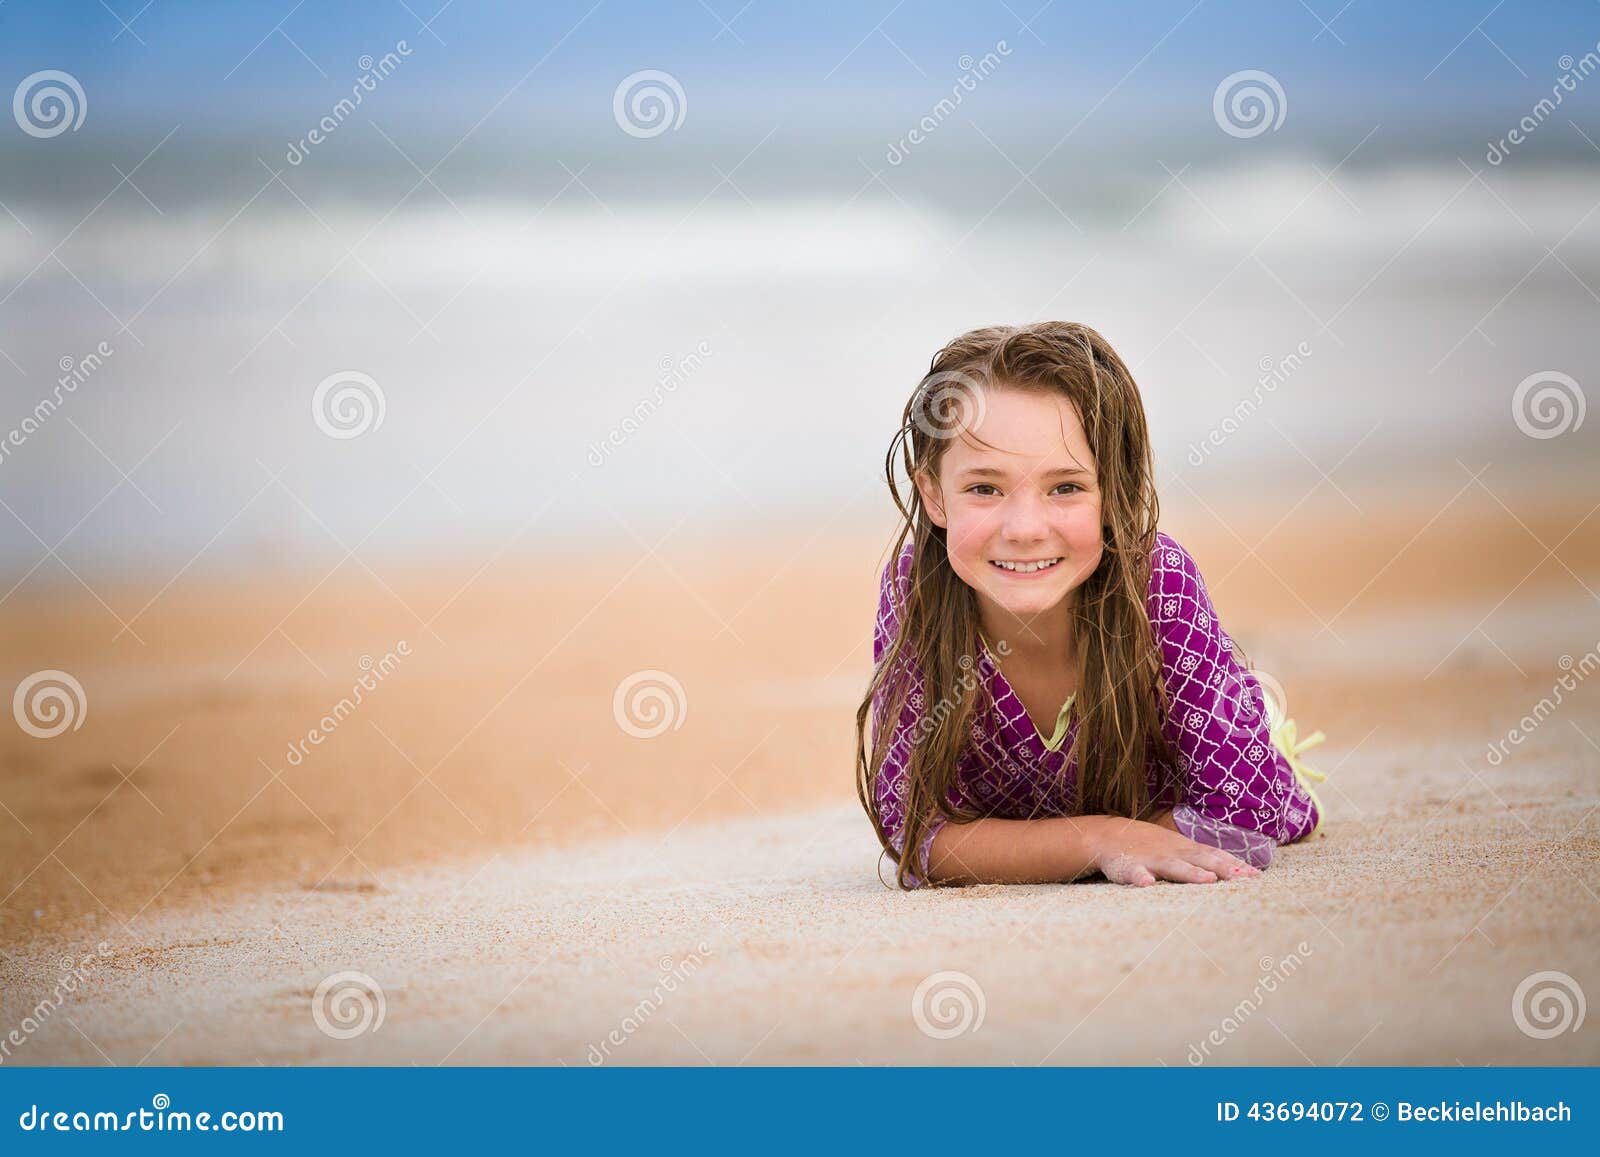 Happy girl at the beach stock photo. Image of laying - 43694072